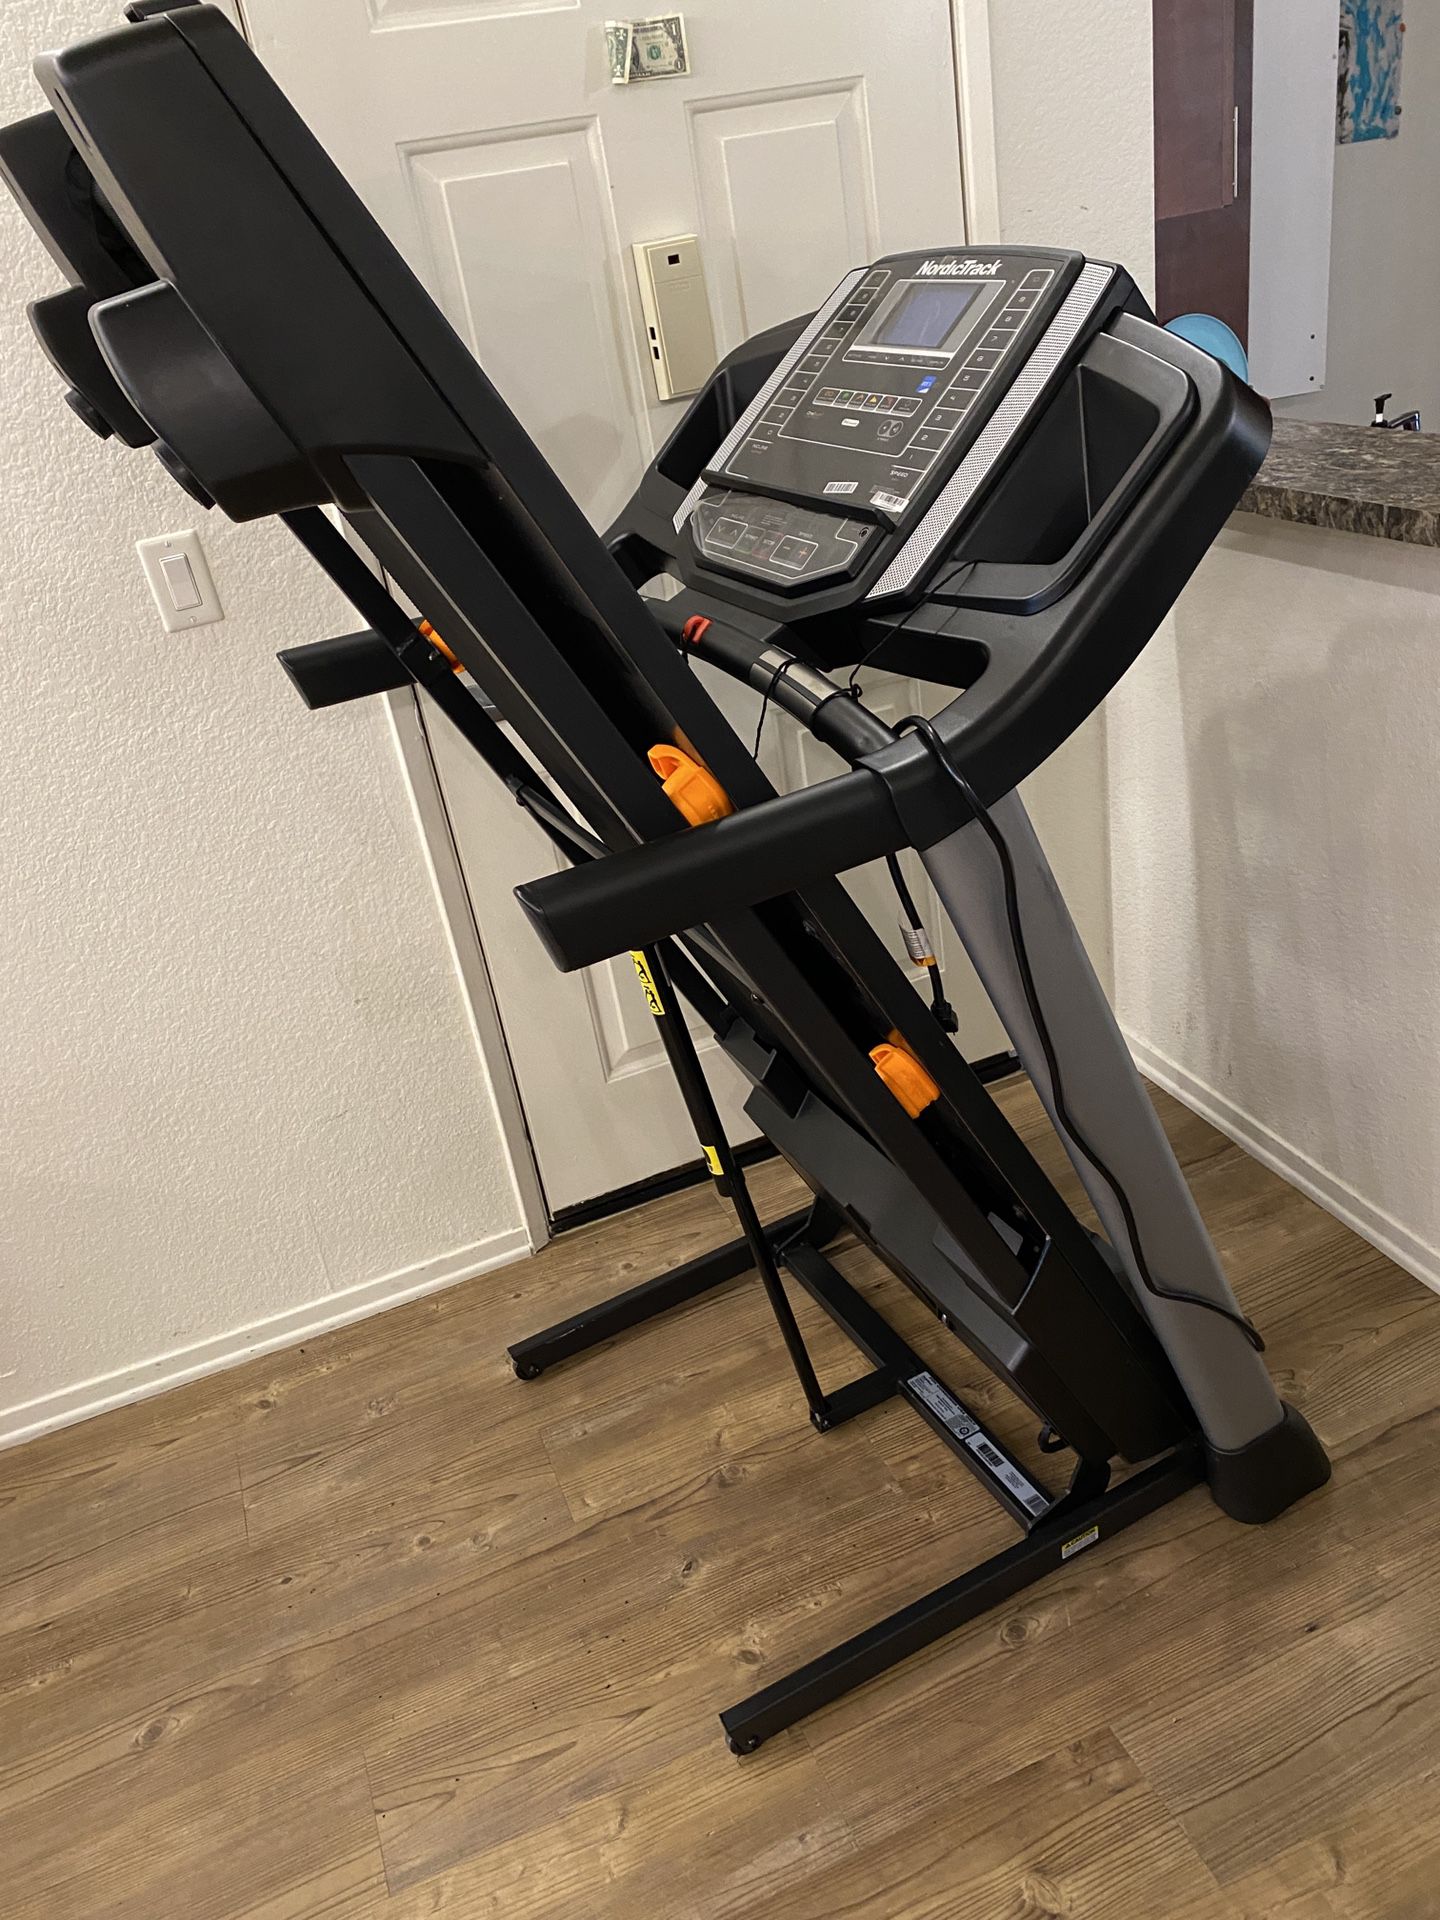 FREE DELIVERY/ LIKE NEW NordicTrack Treadmill iFit Compatible, Incine, Folds Up, Delivery